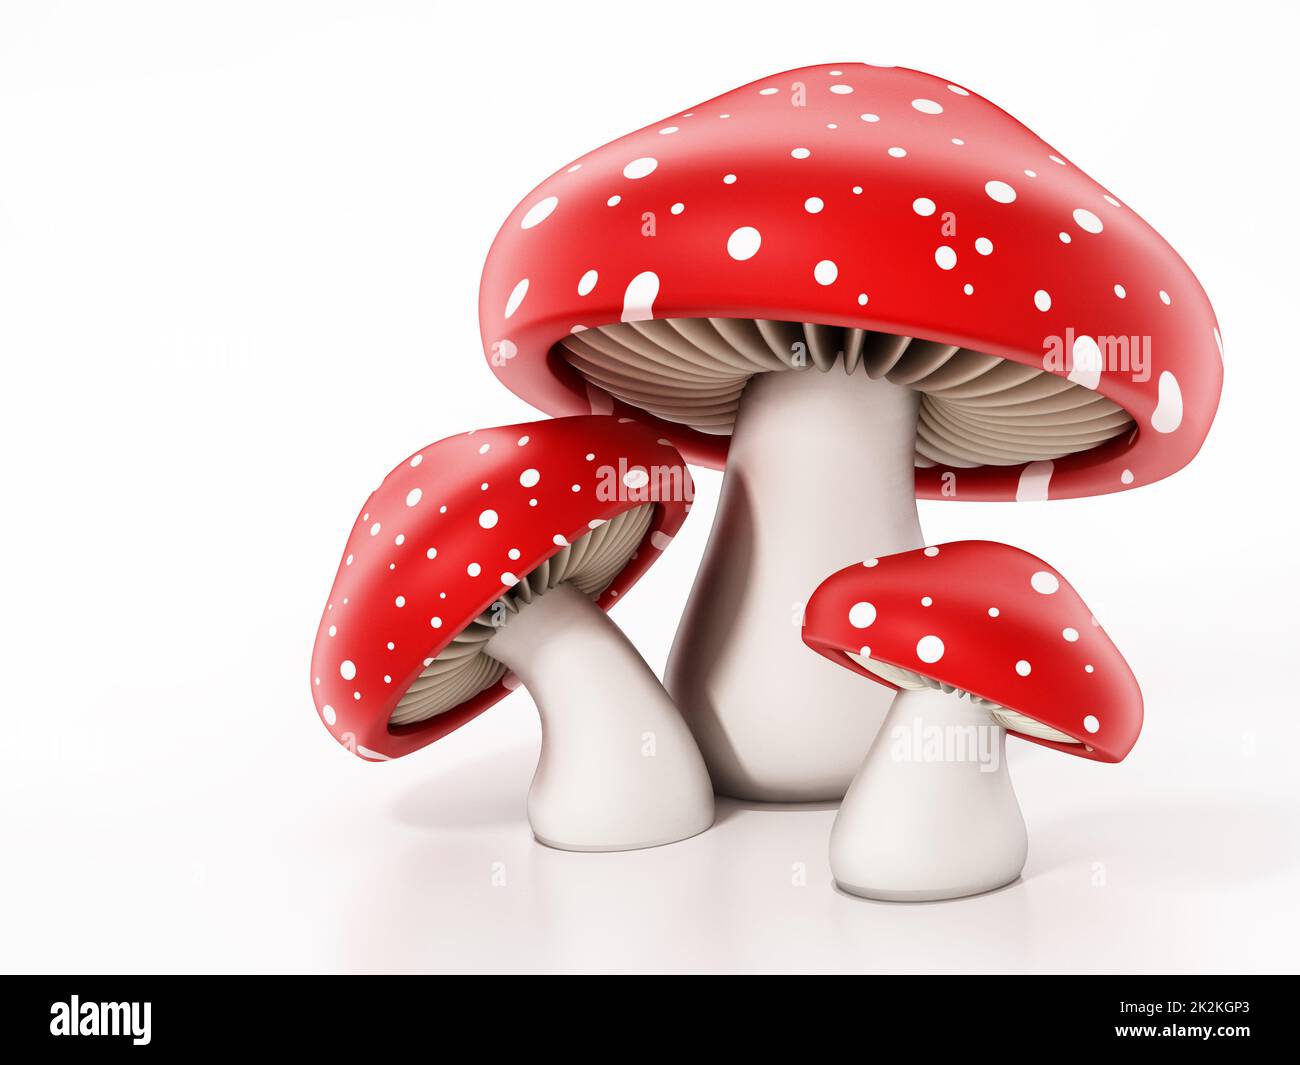 Red and white wild mushrooms isolated on white background. 3D illustration Stock Photo